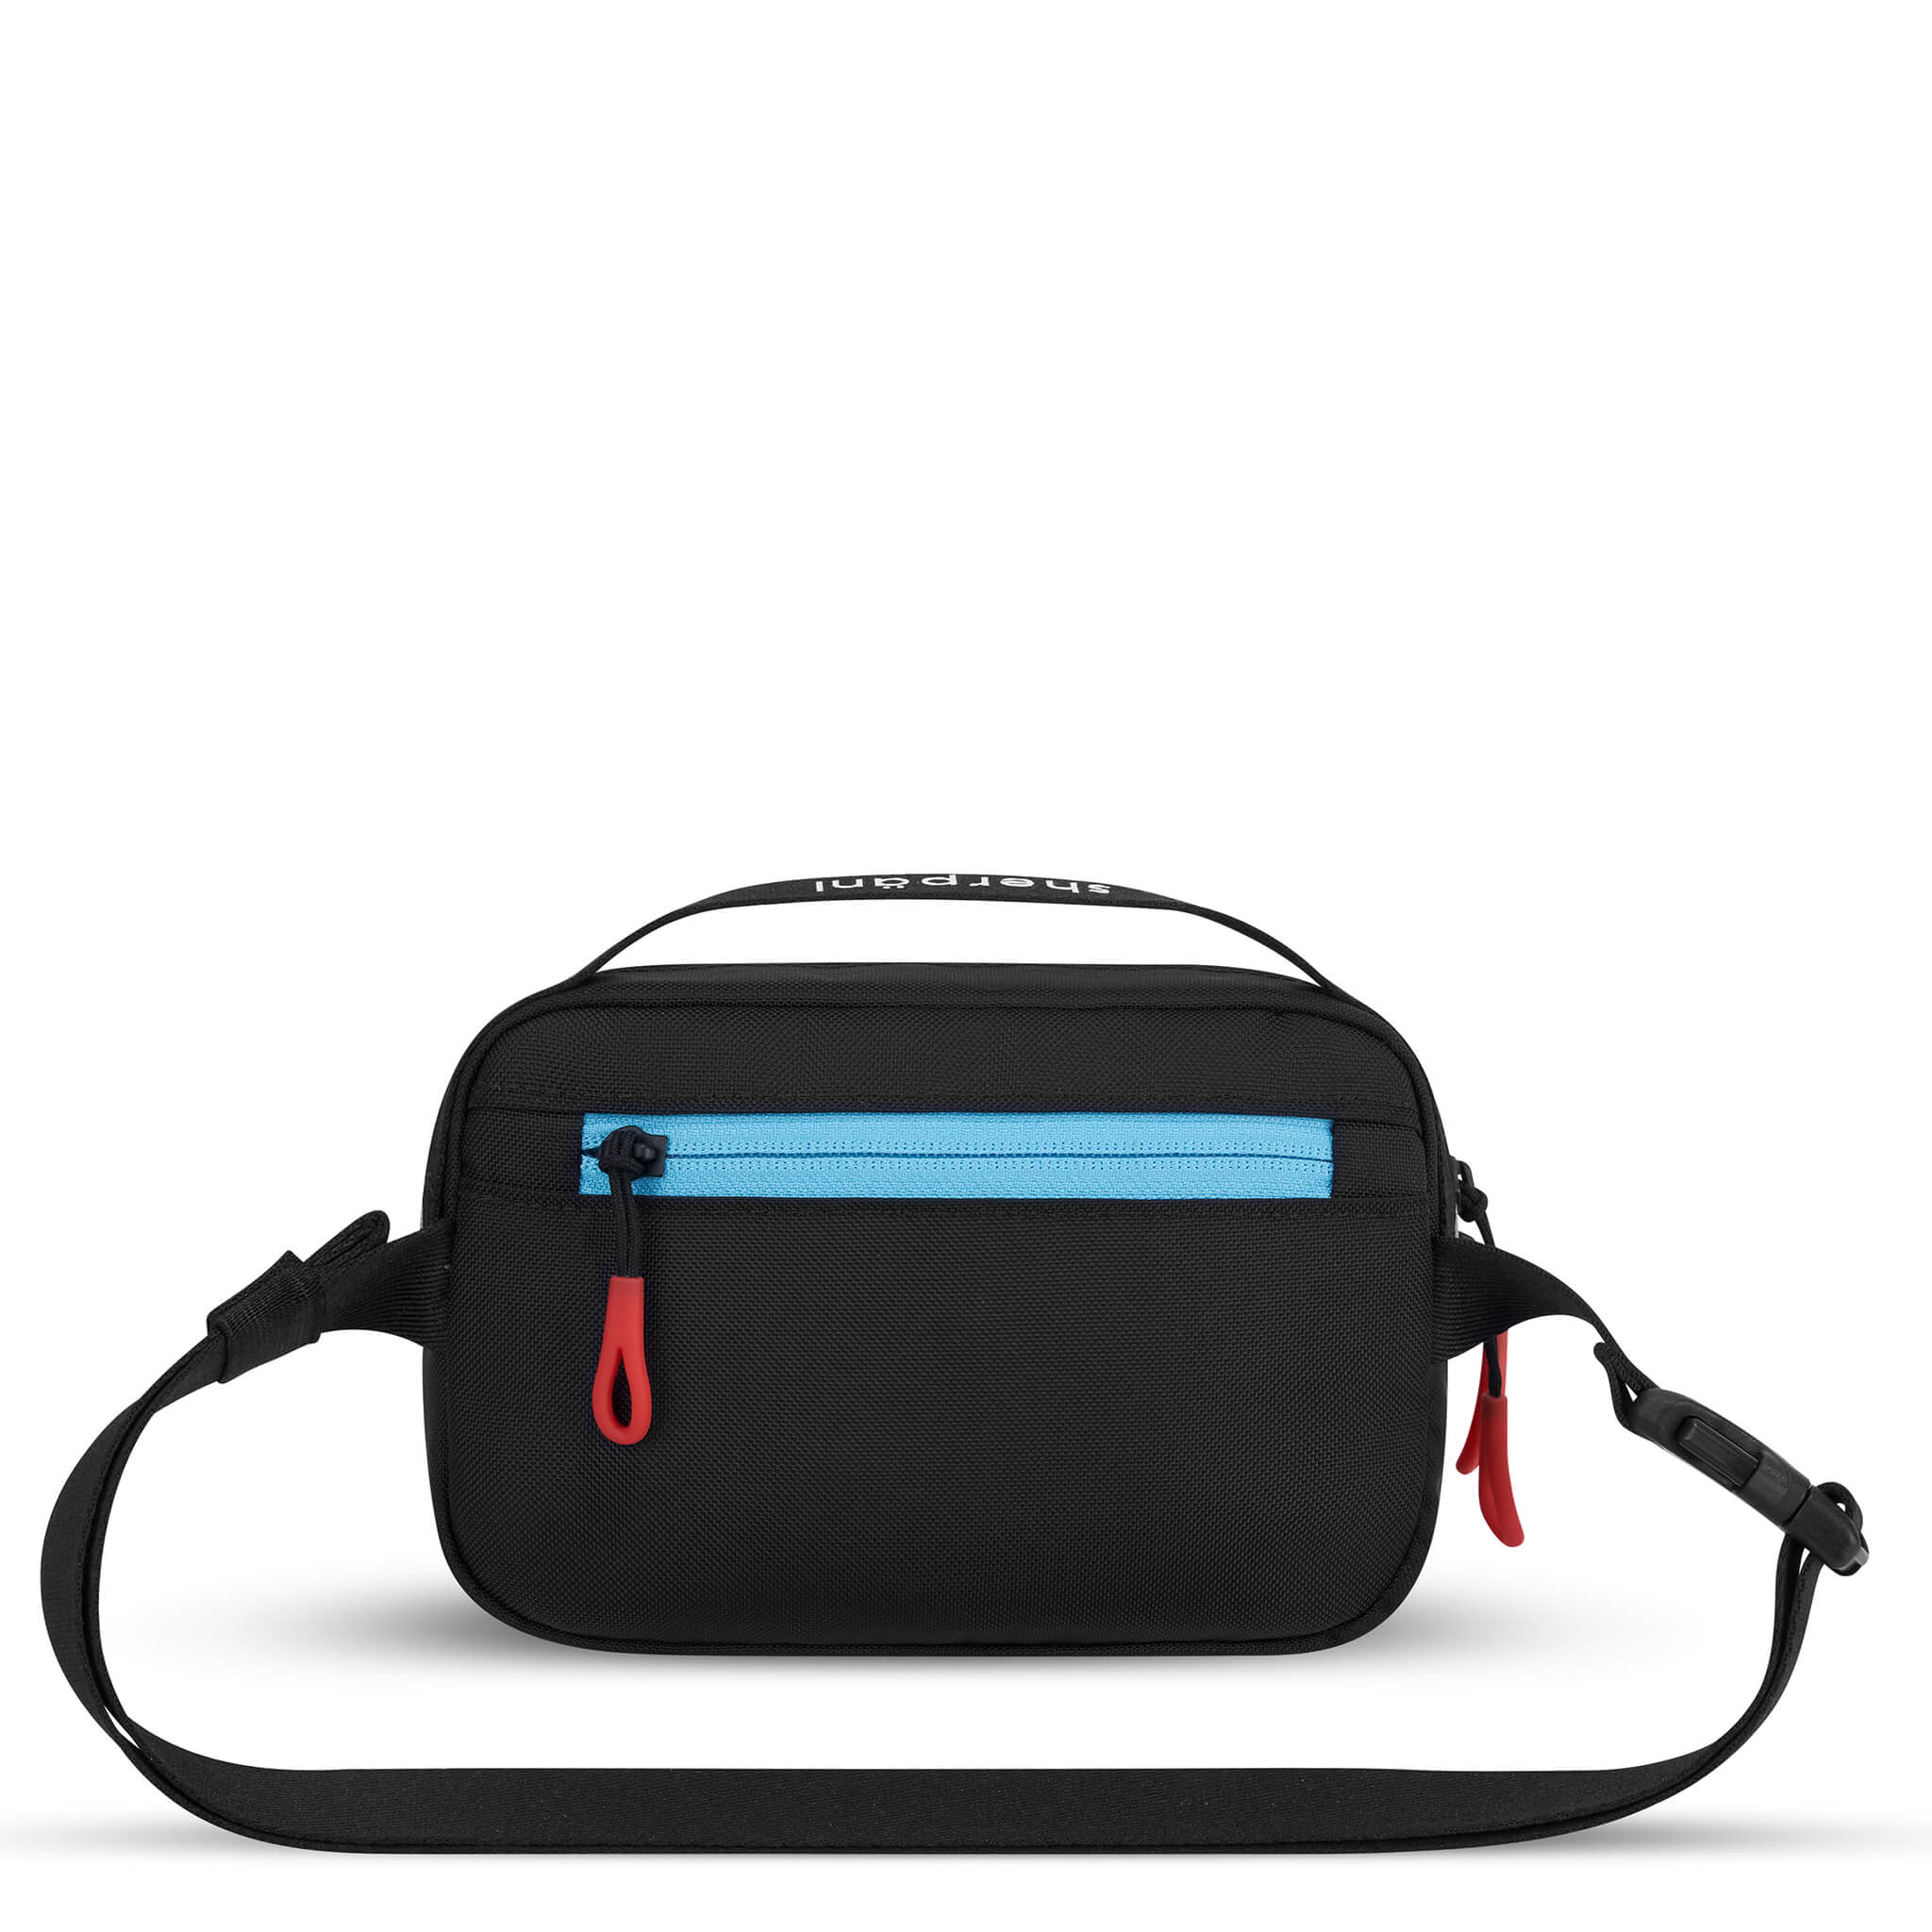 Back view of Sherpani's fanny pack, the Hyk in Chromatic. The back of the bag is black with a blue accent. Easy-pull zippers are accented in red. The fanny pack features an adjustable strap with a buckle.